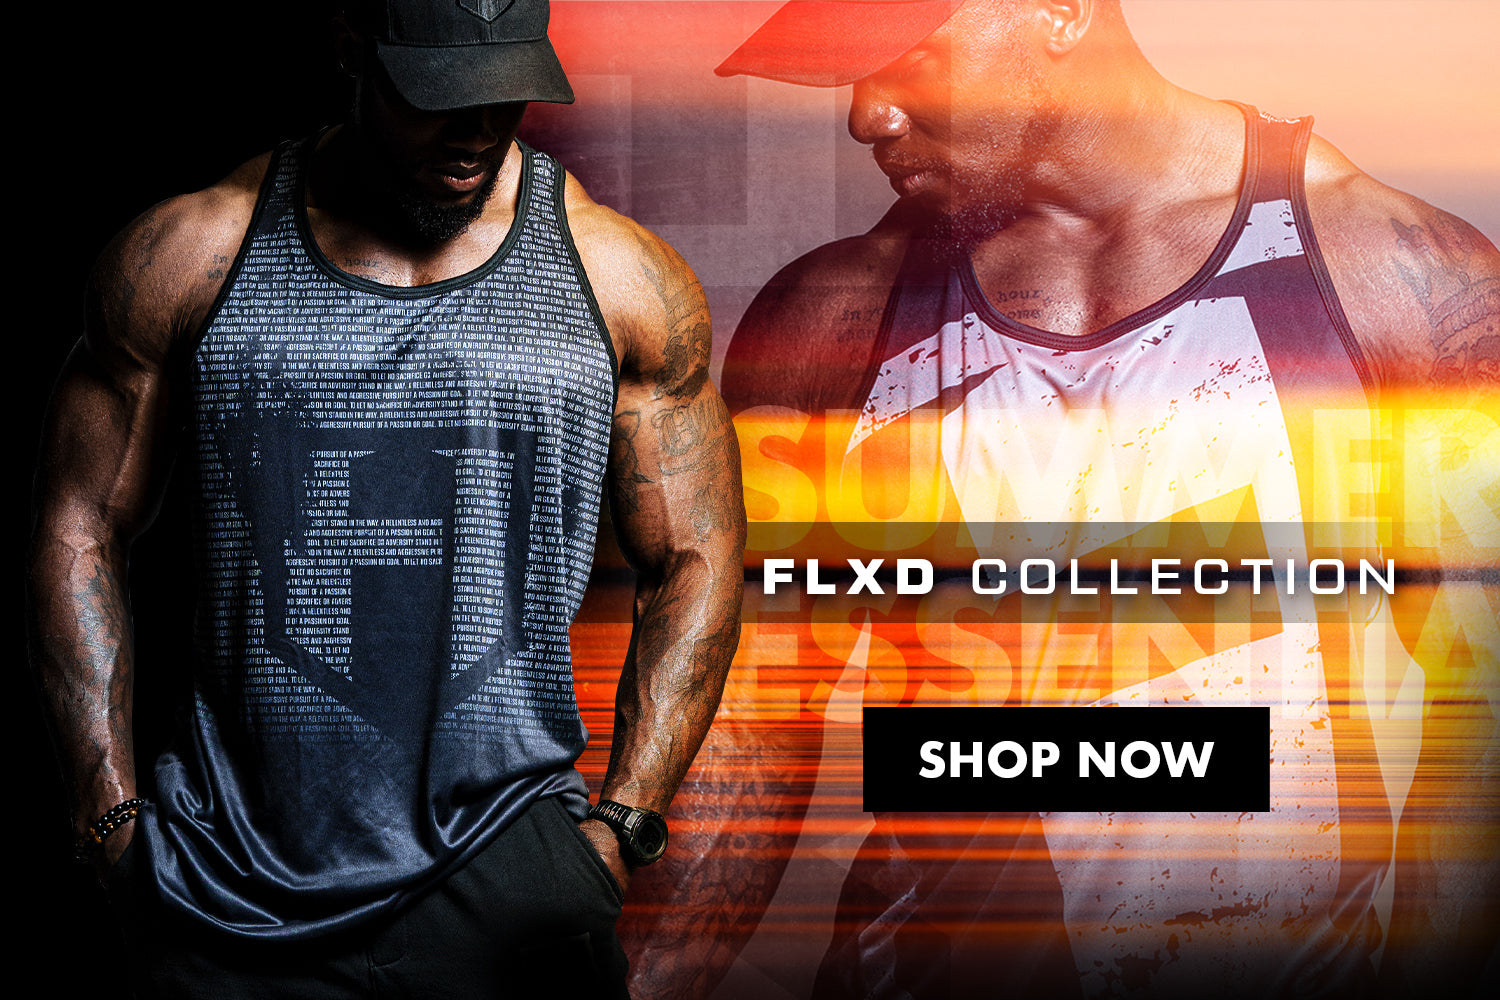 FLXD Collection bodybuilding tank tops